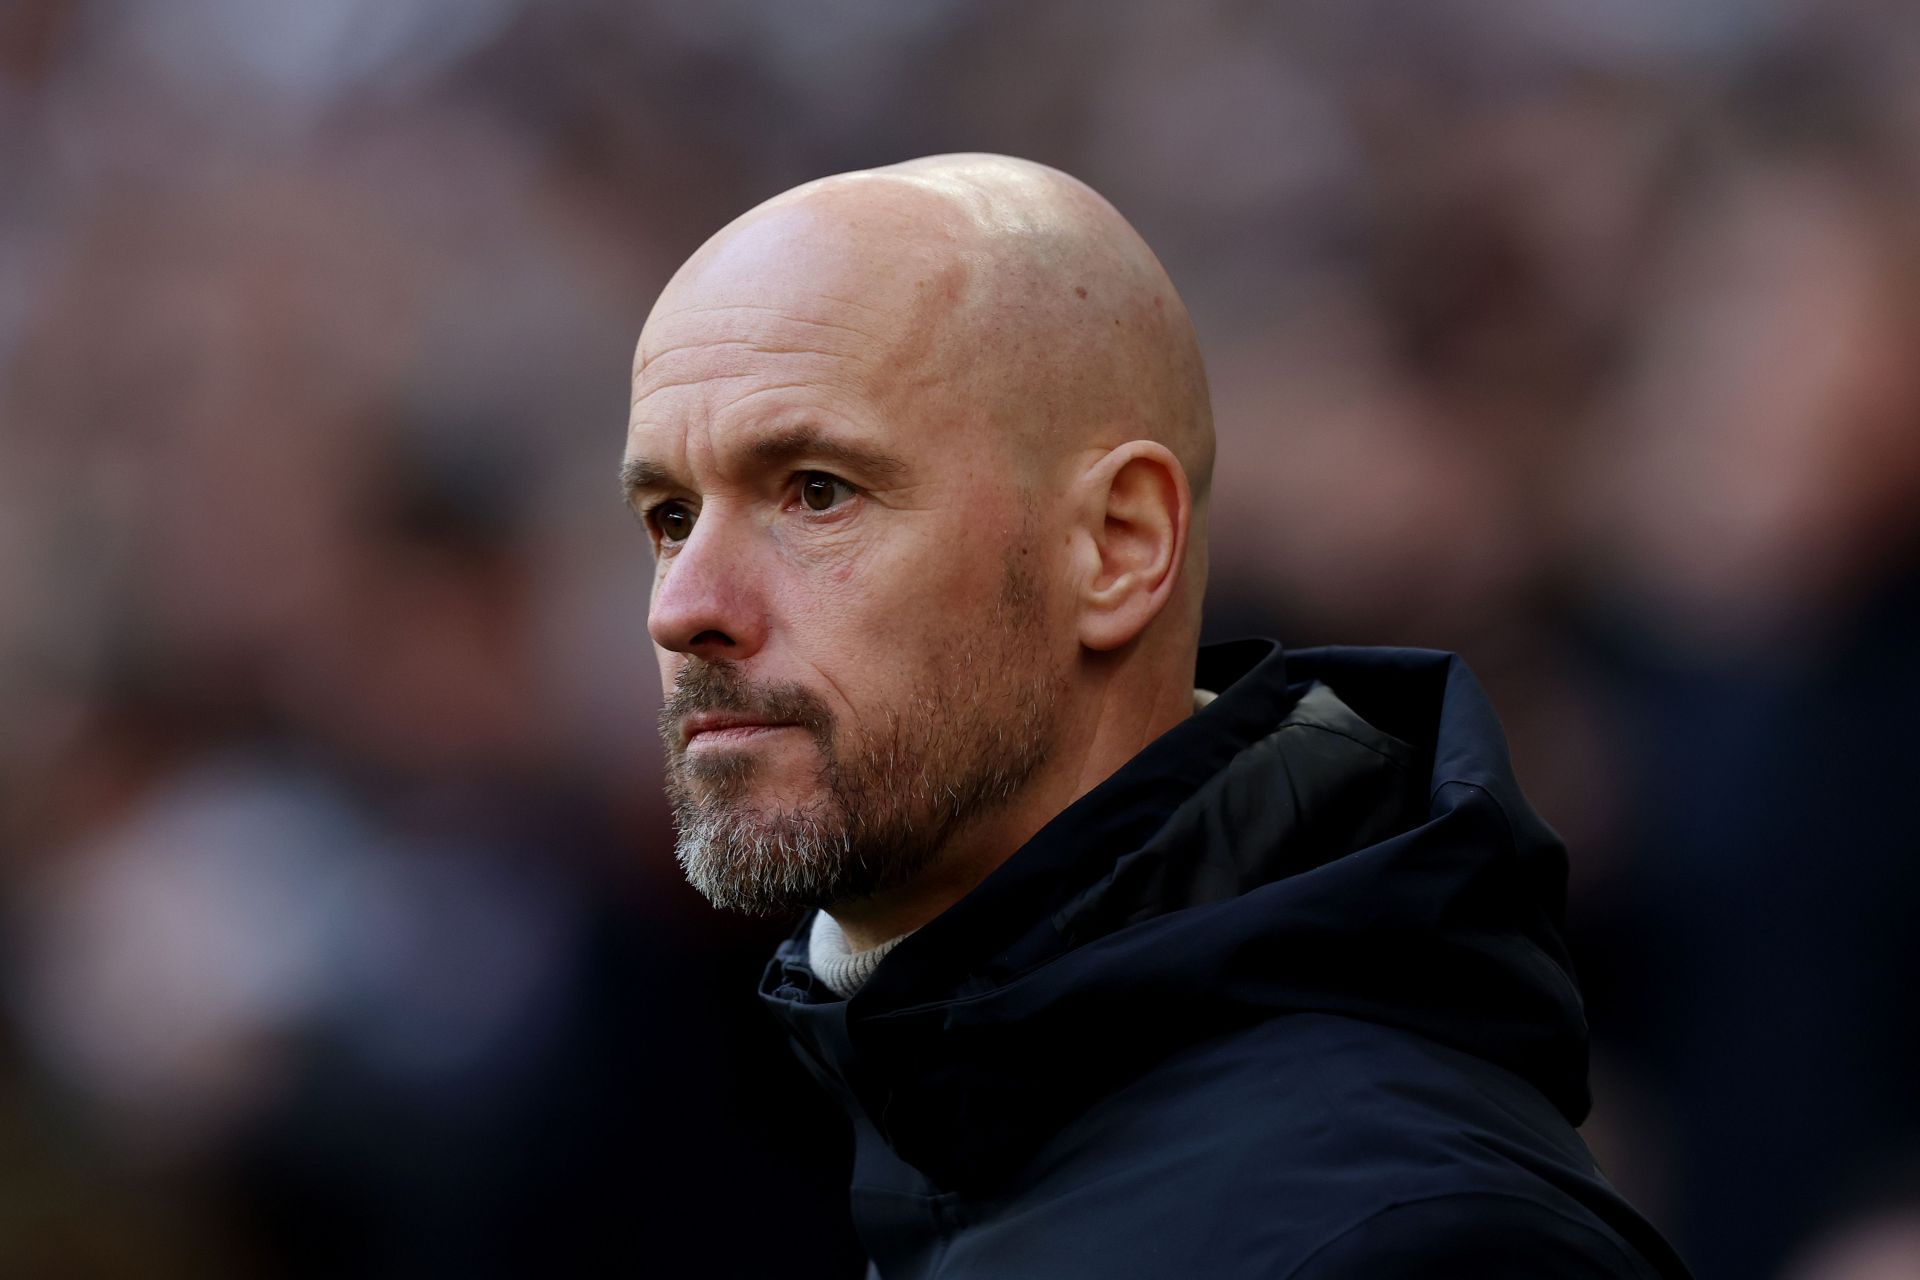 Erik ten Hag ended a long trophy drought with the Carabao Cup triumph.